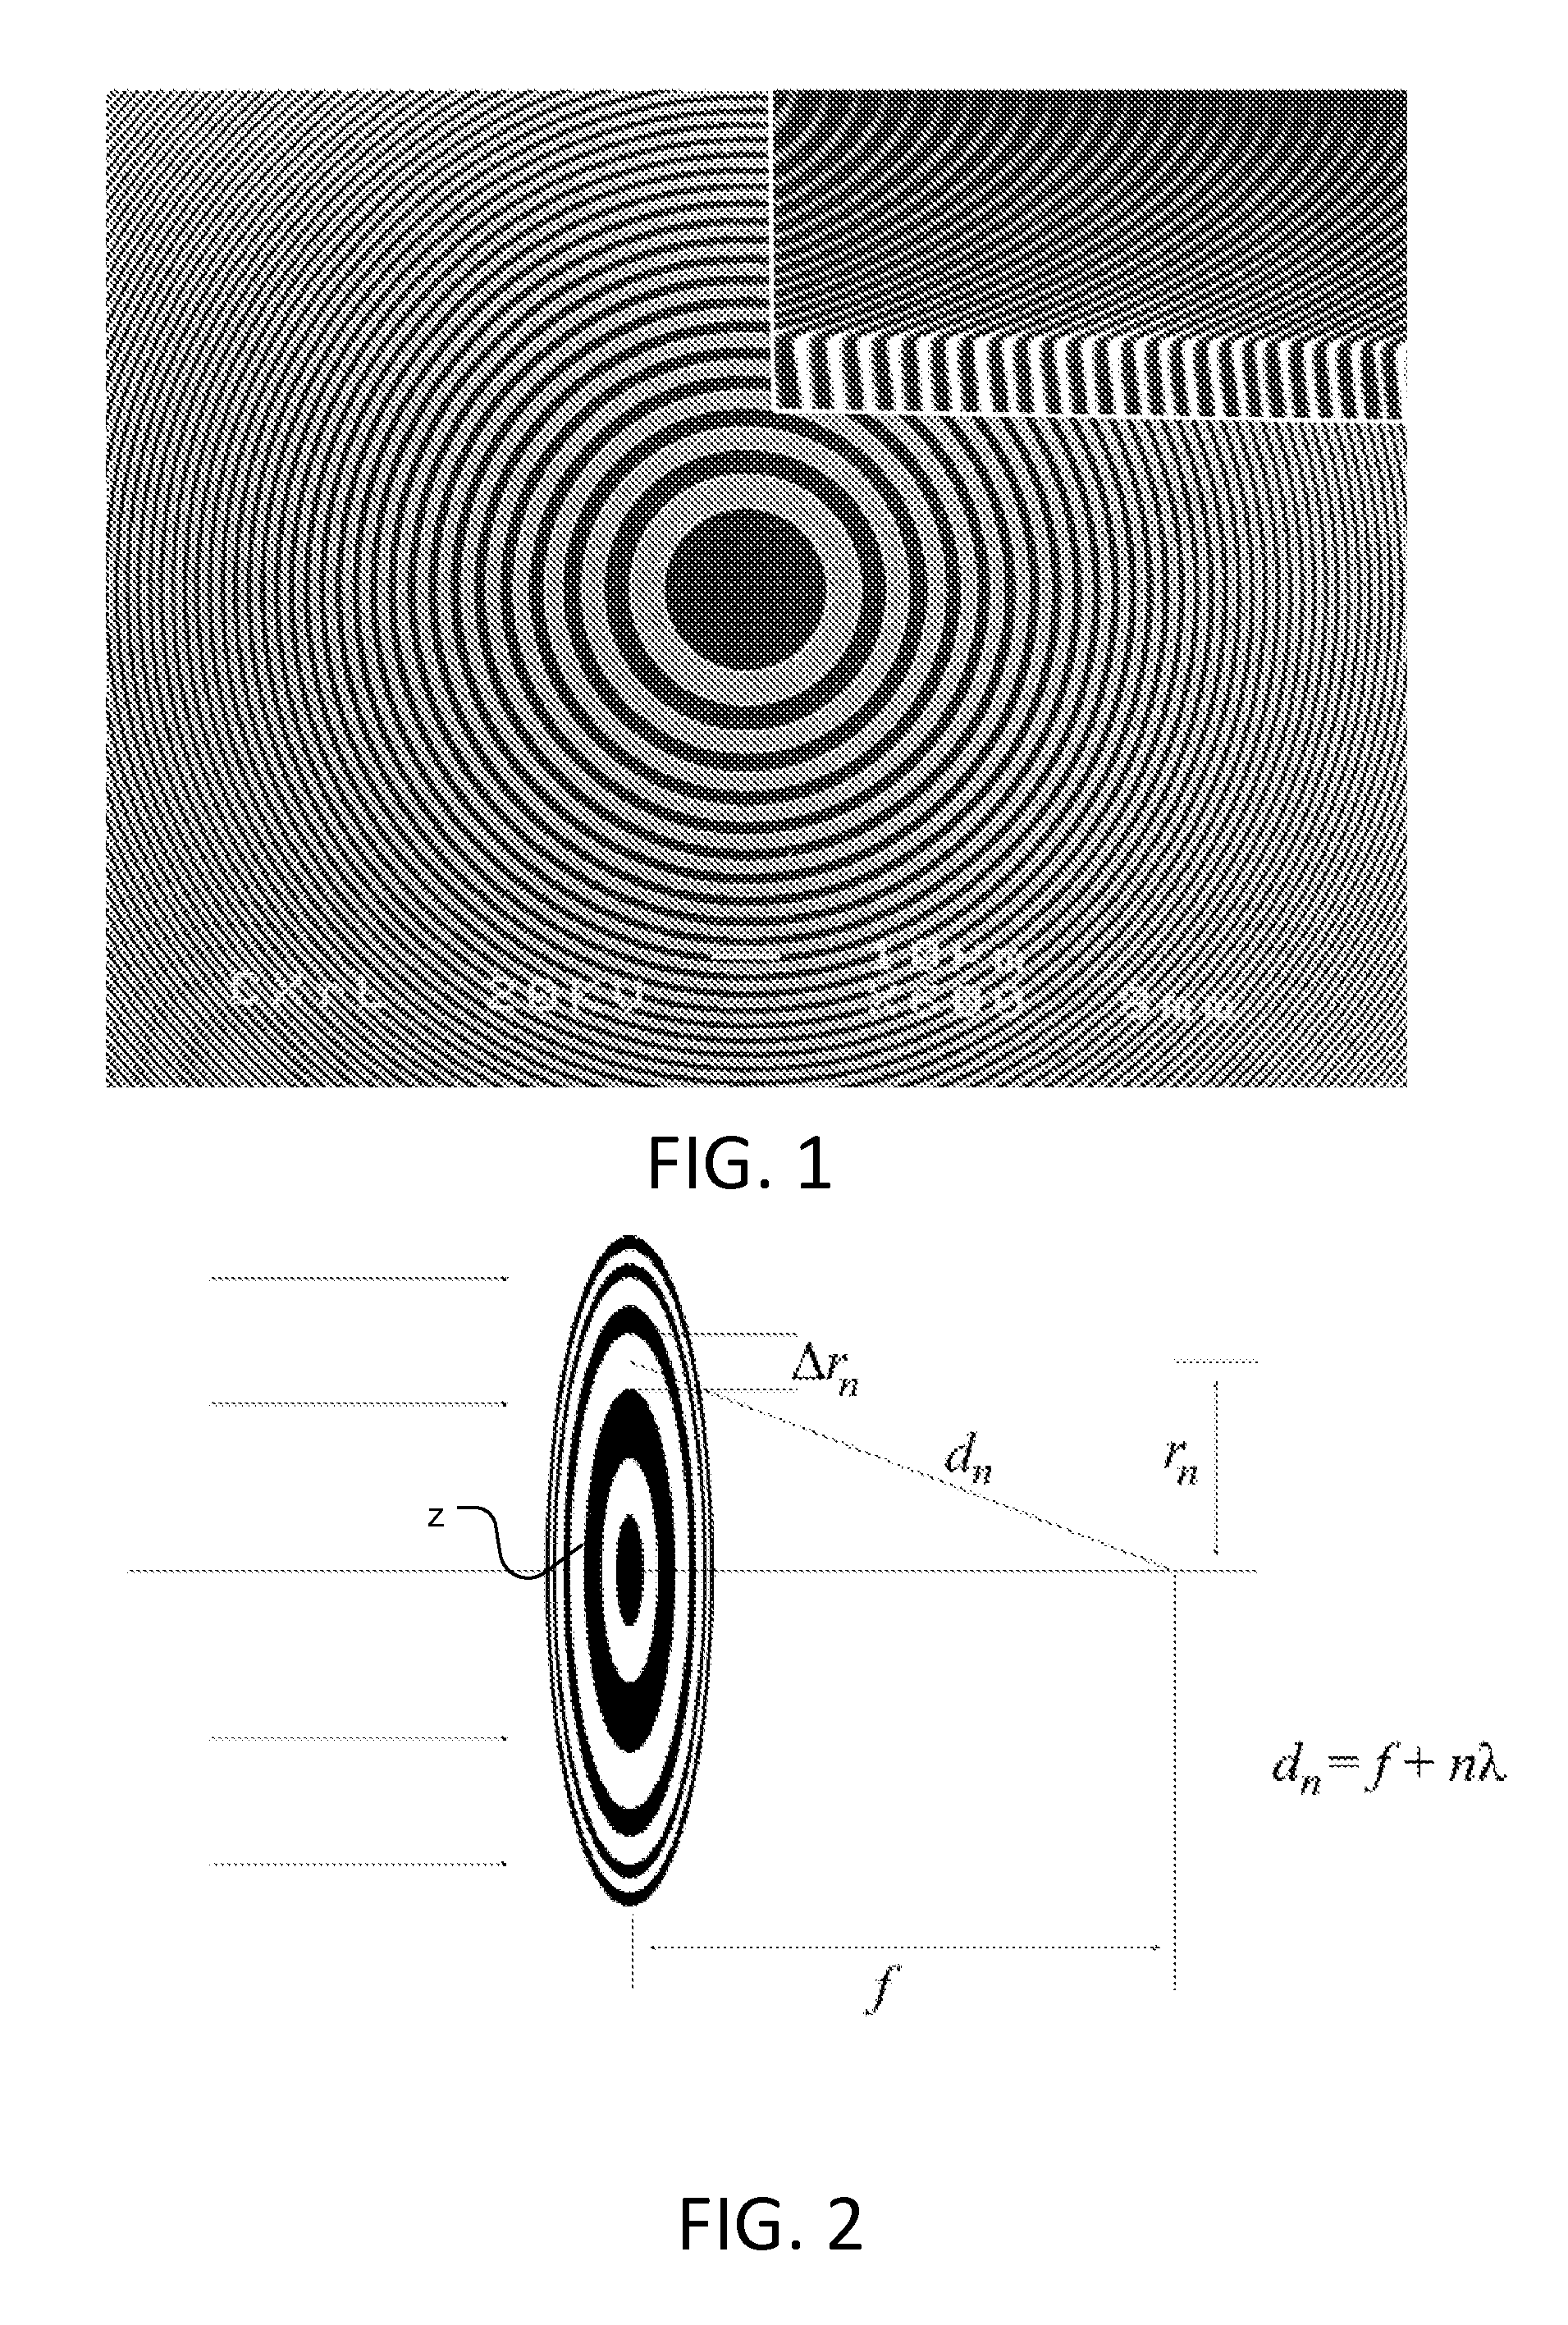 Compound X-ray lens having multiple aligned zone plates